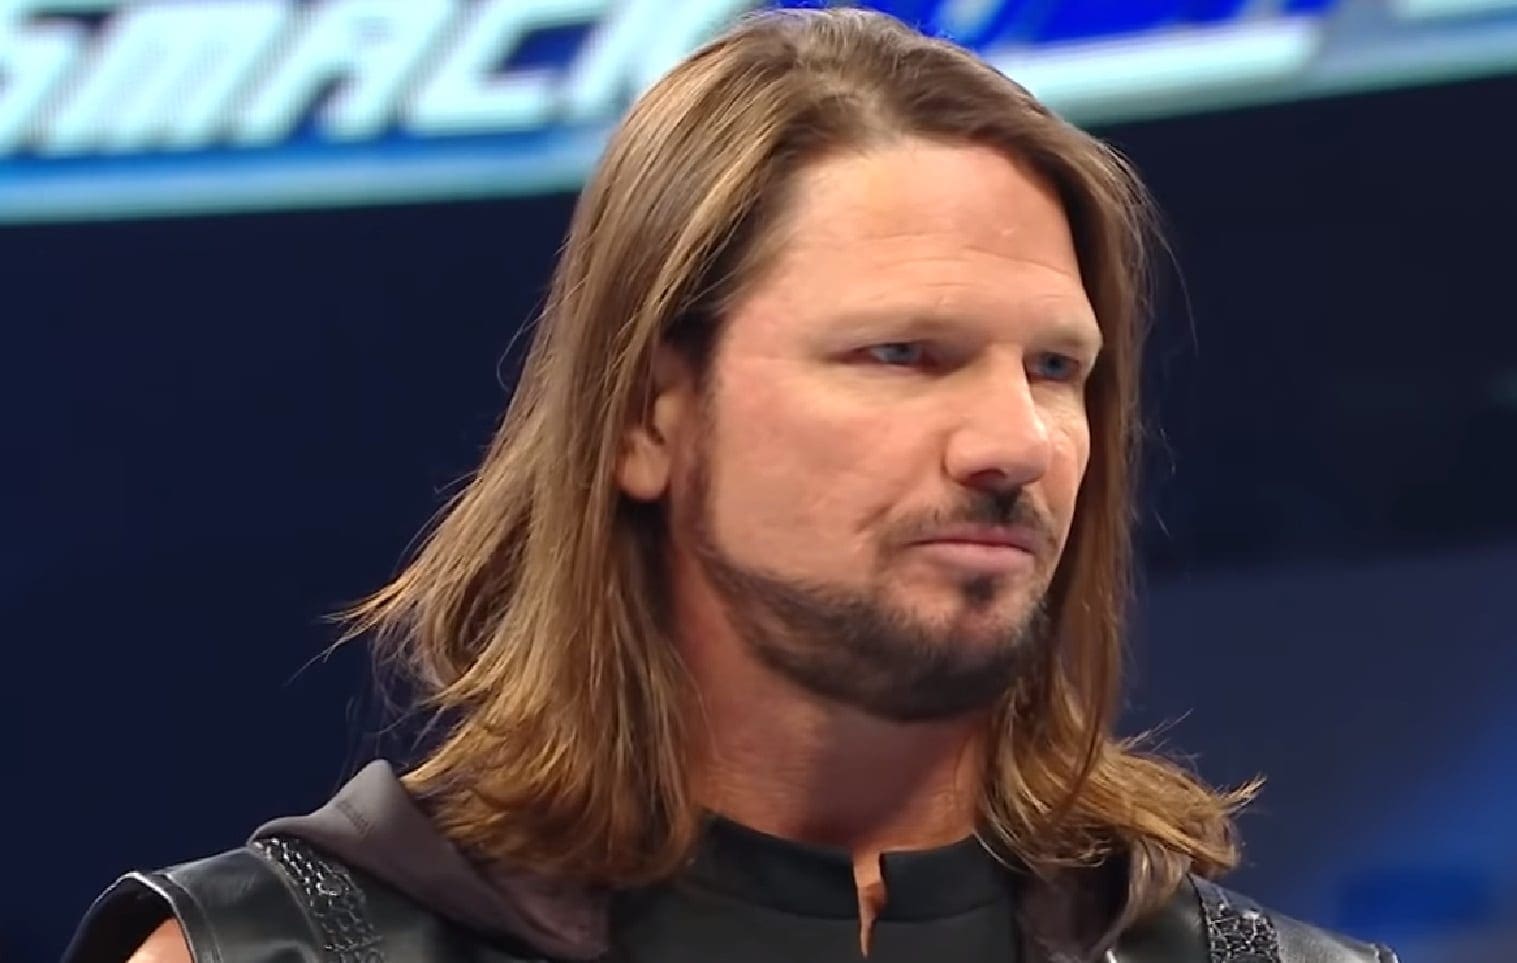 AJ Styles’ Likely Future With WWE After Contract Expires